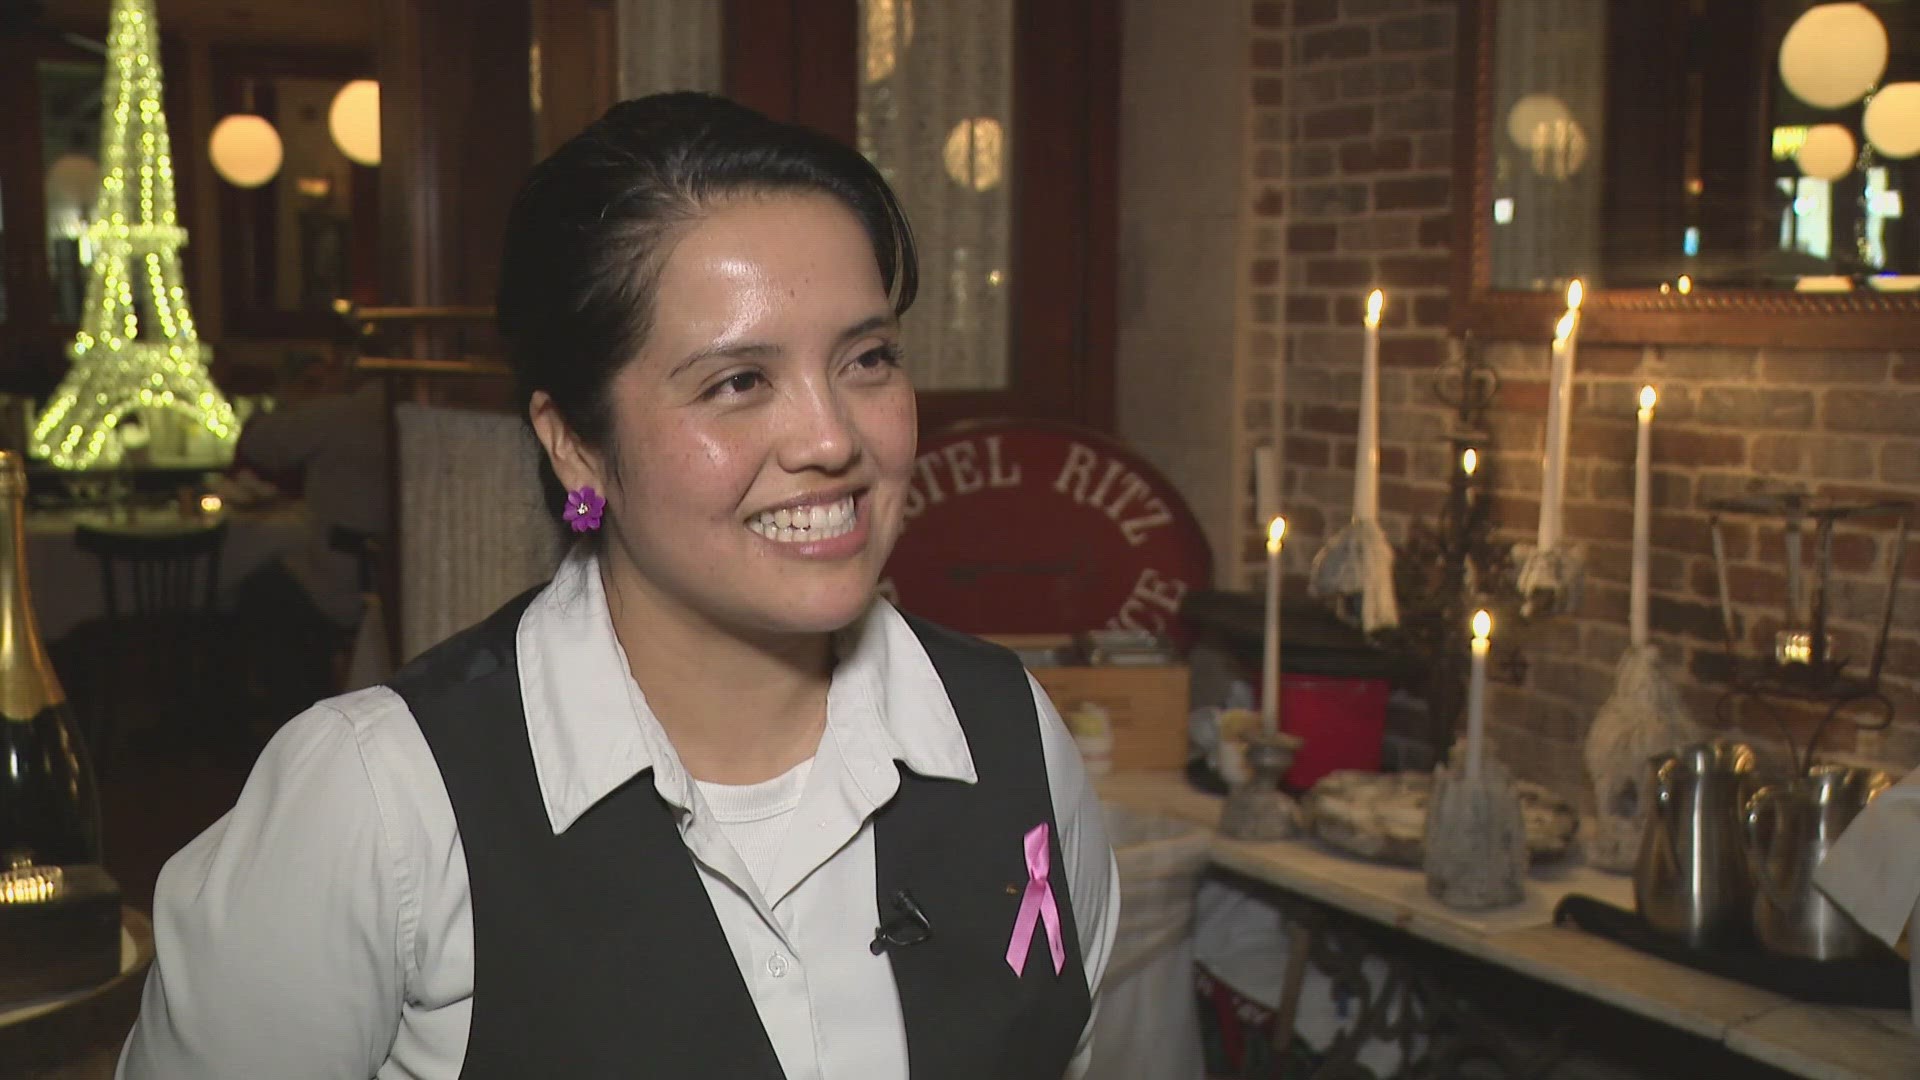 This Server of the Week has been bringing smiles to customers for more than 20 years. Here's her story.